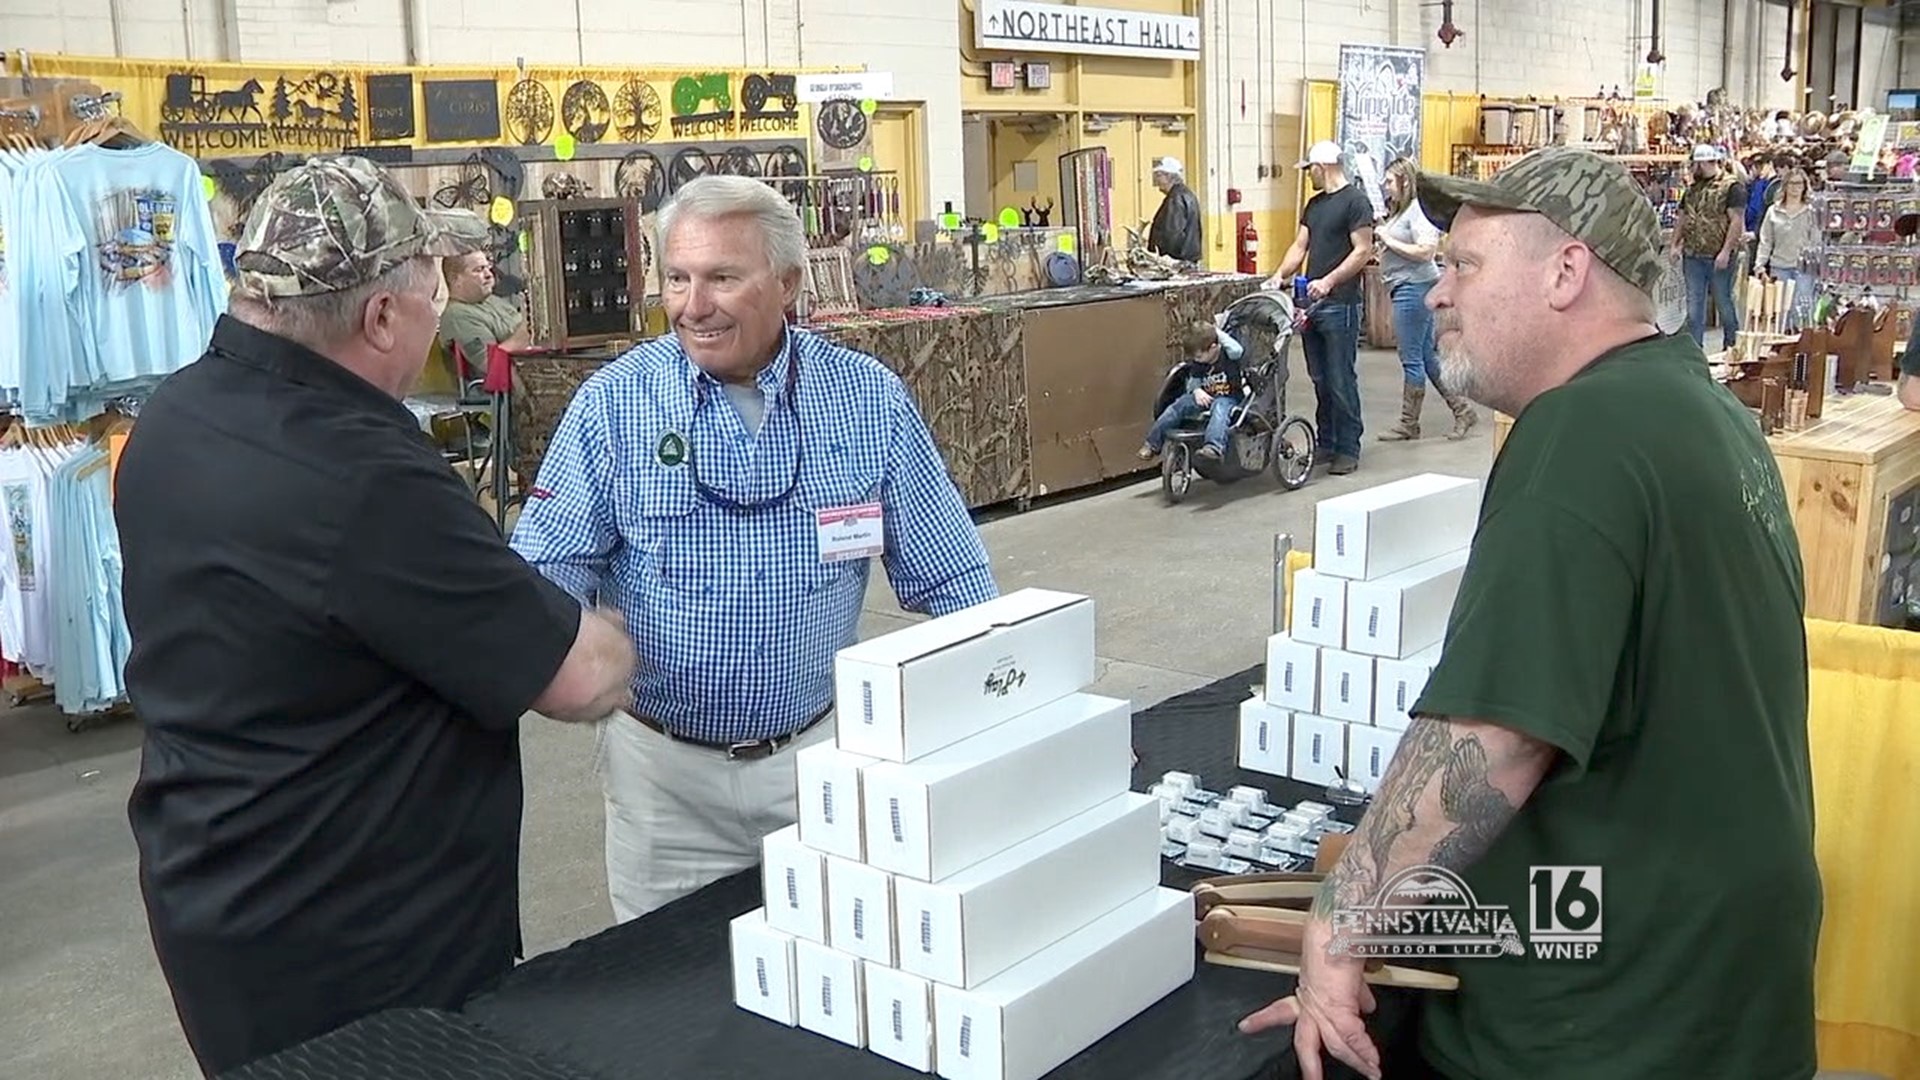 Take in the sights and sounds of the 2020 NRA Great American Outdoor Show